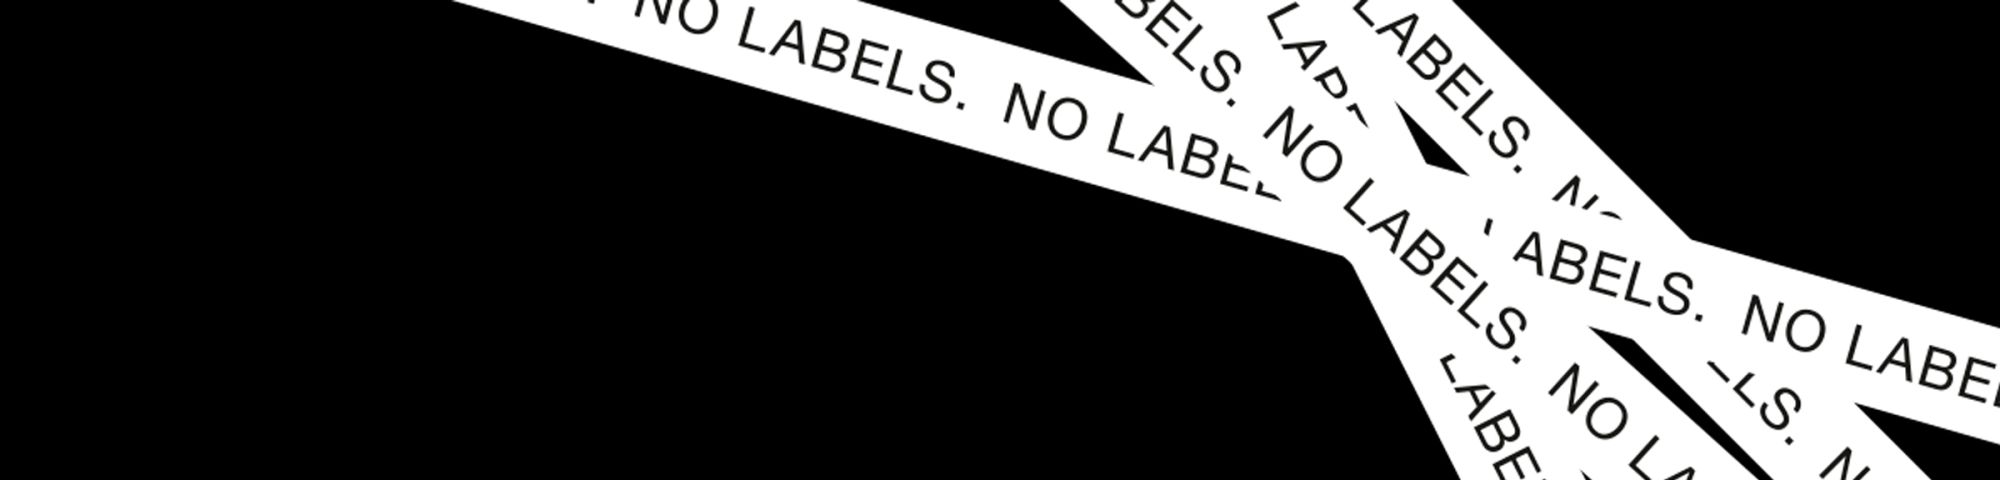 No Labels Banner. Black with white tape.